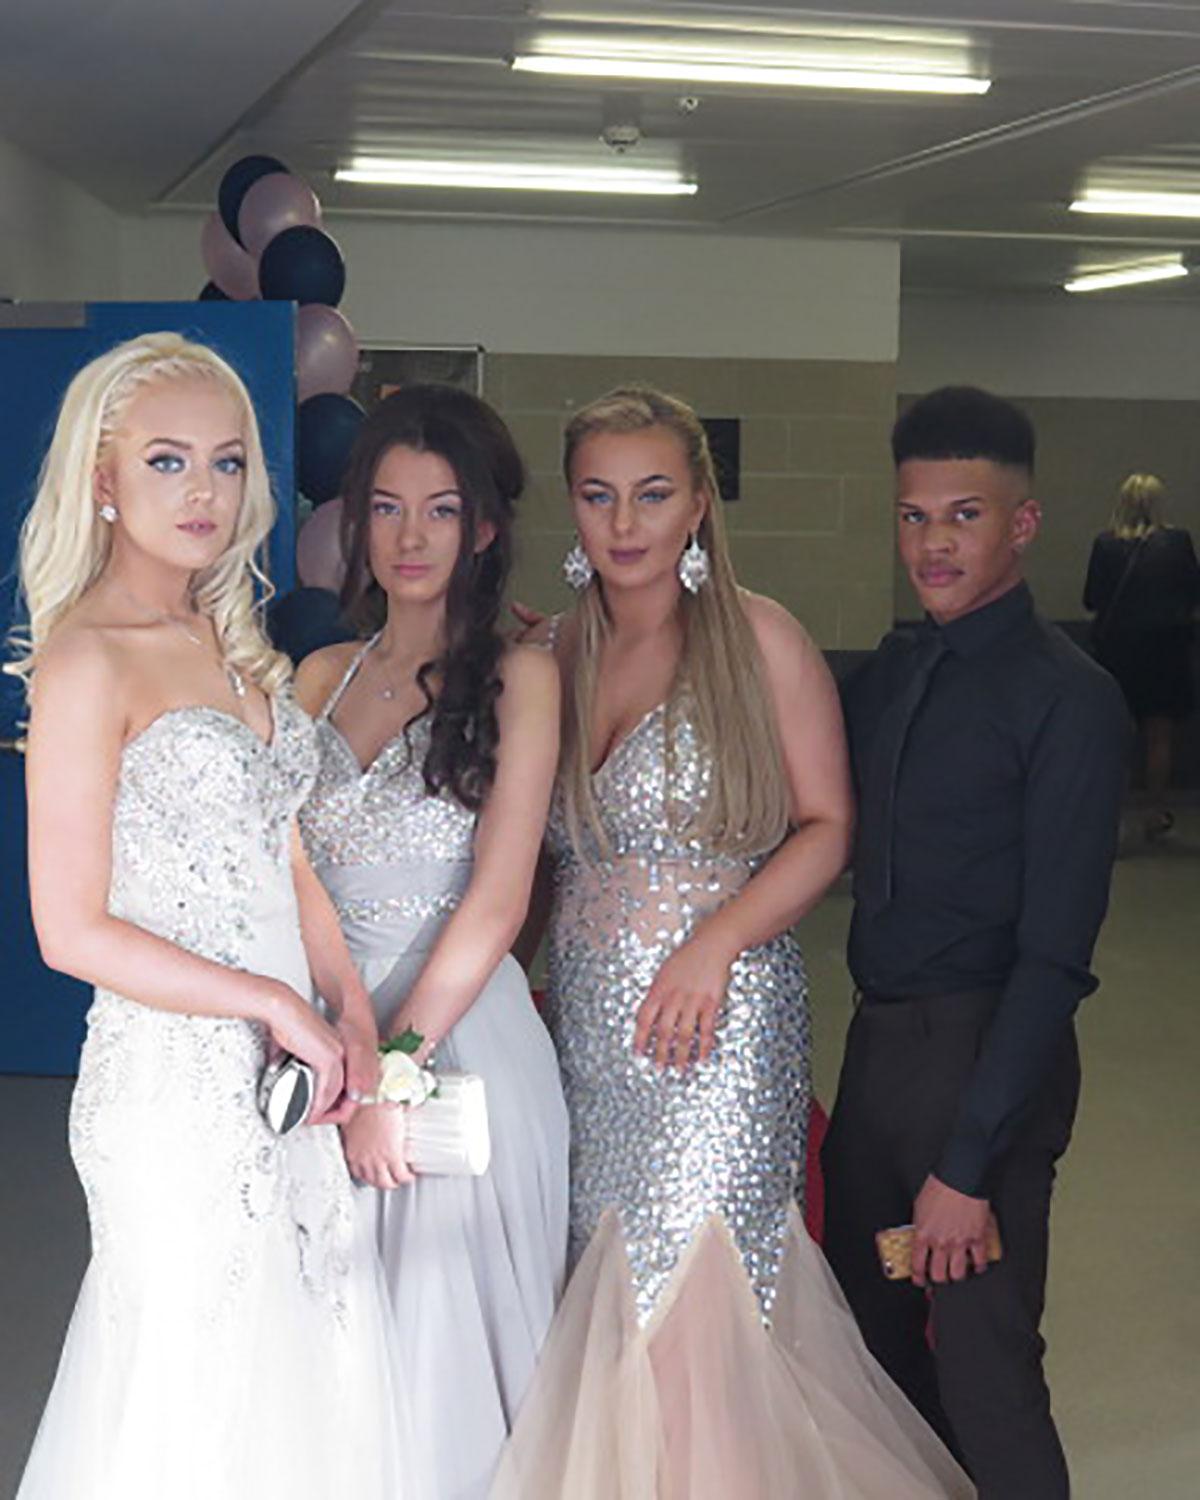 Llanwern: Dolled up for the prom